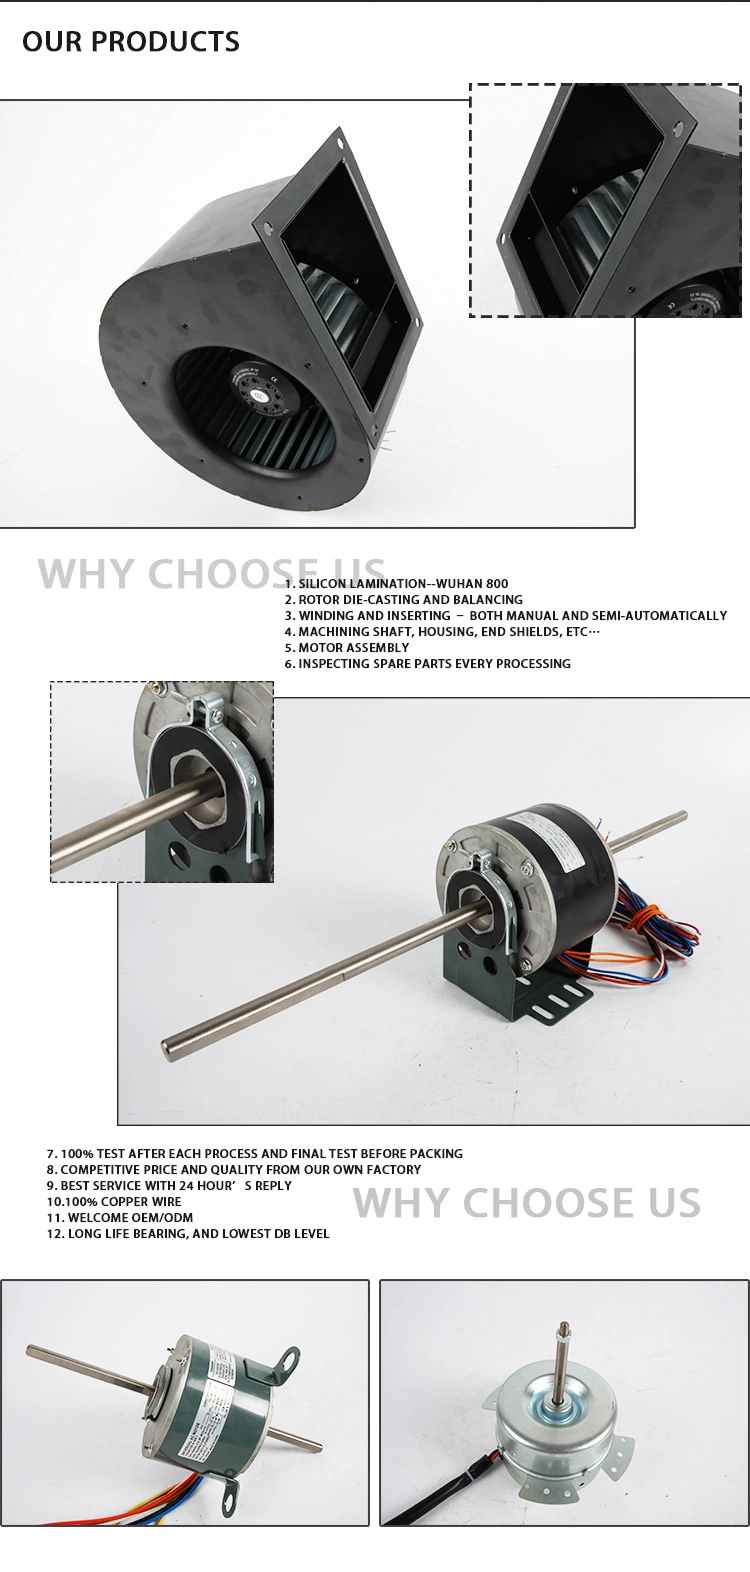 Air Conditioner Indoor Fan Motor Ydk, Suitable for 3p, 5p and 10p Indoor Air Conditioners